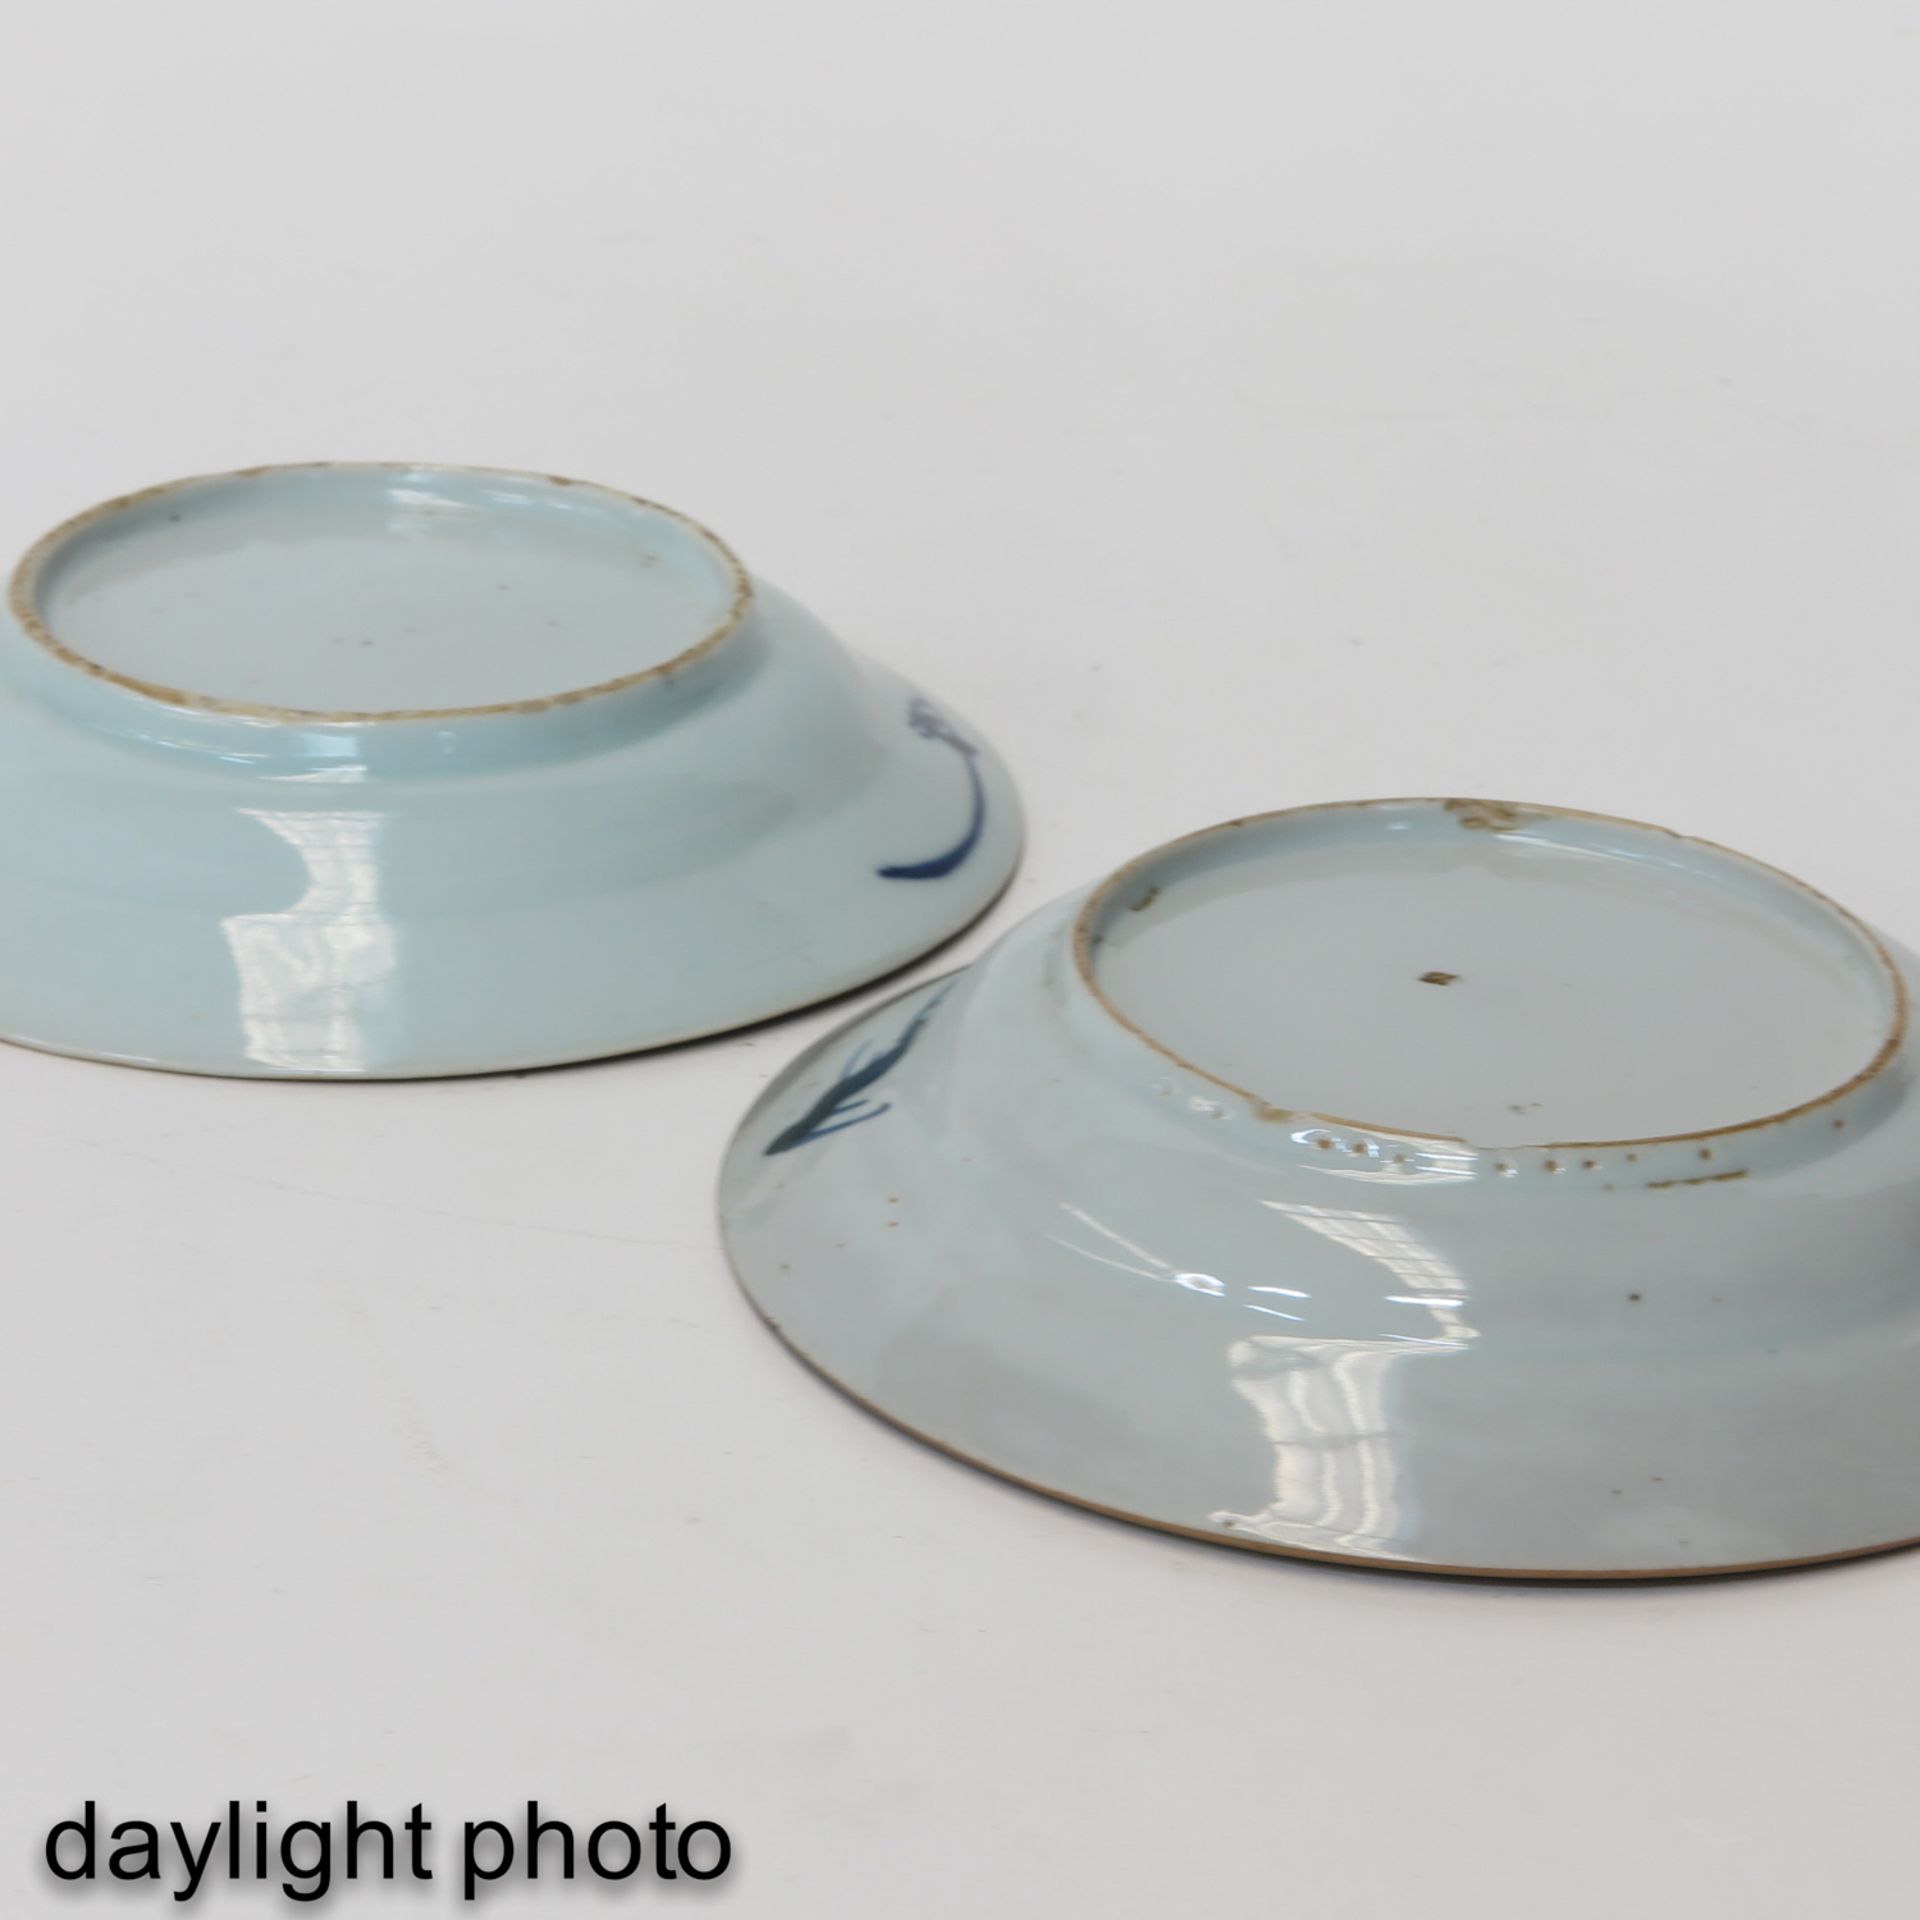 A Pair of Small Blue and White Plates - Image 8 of 9